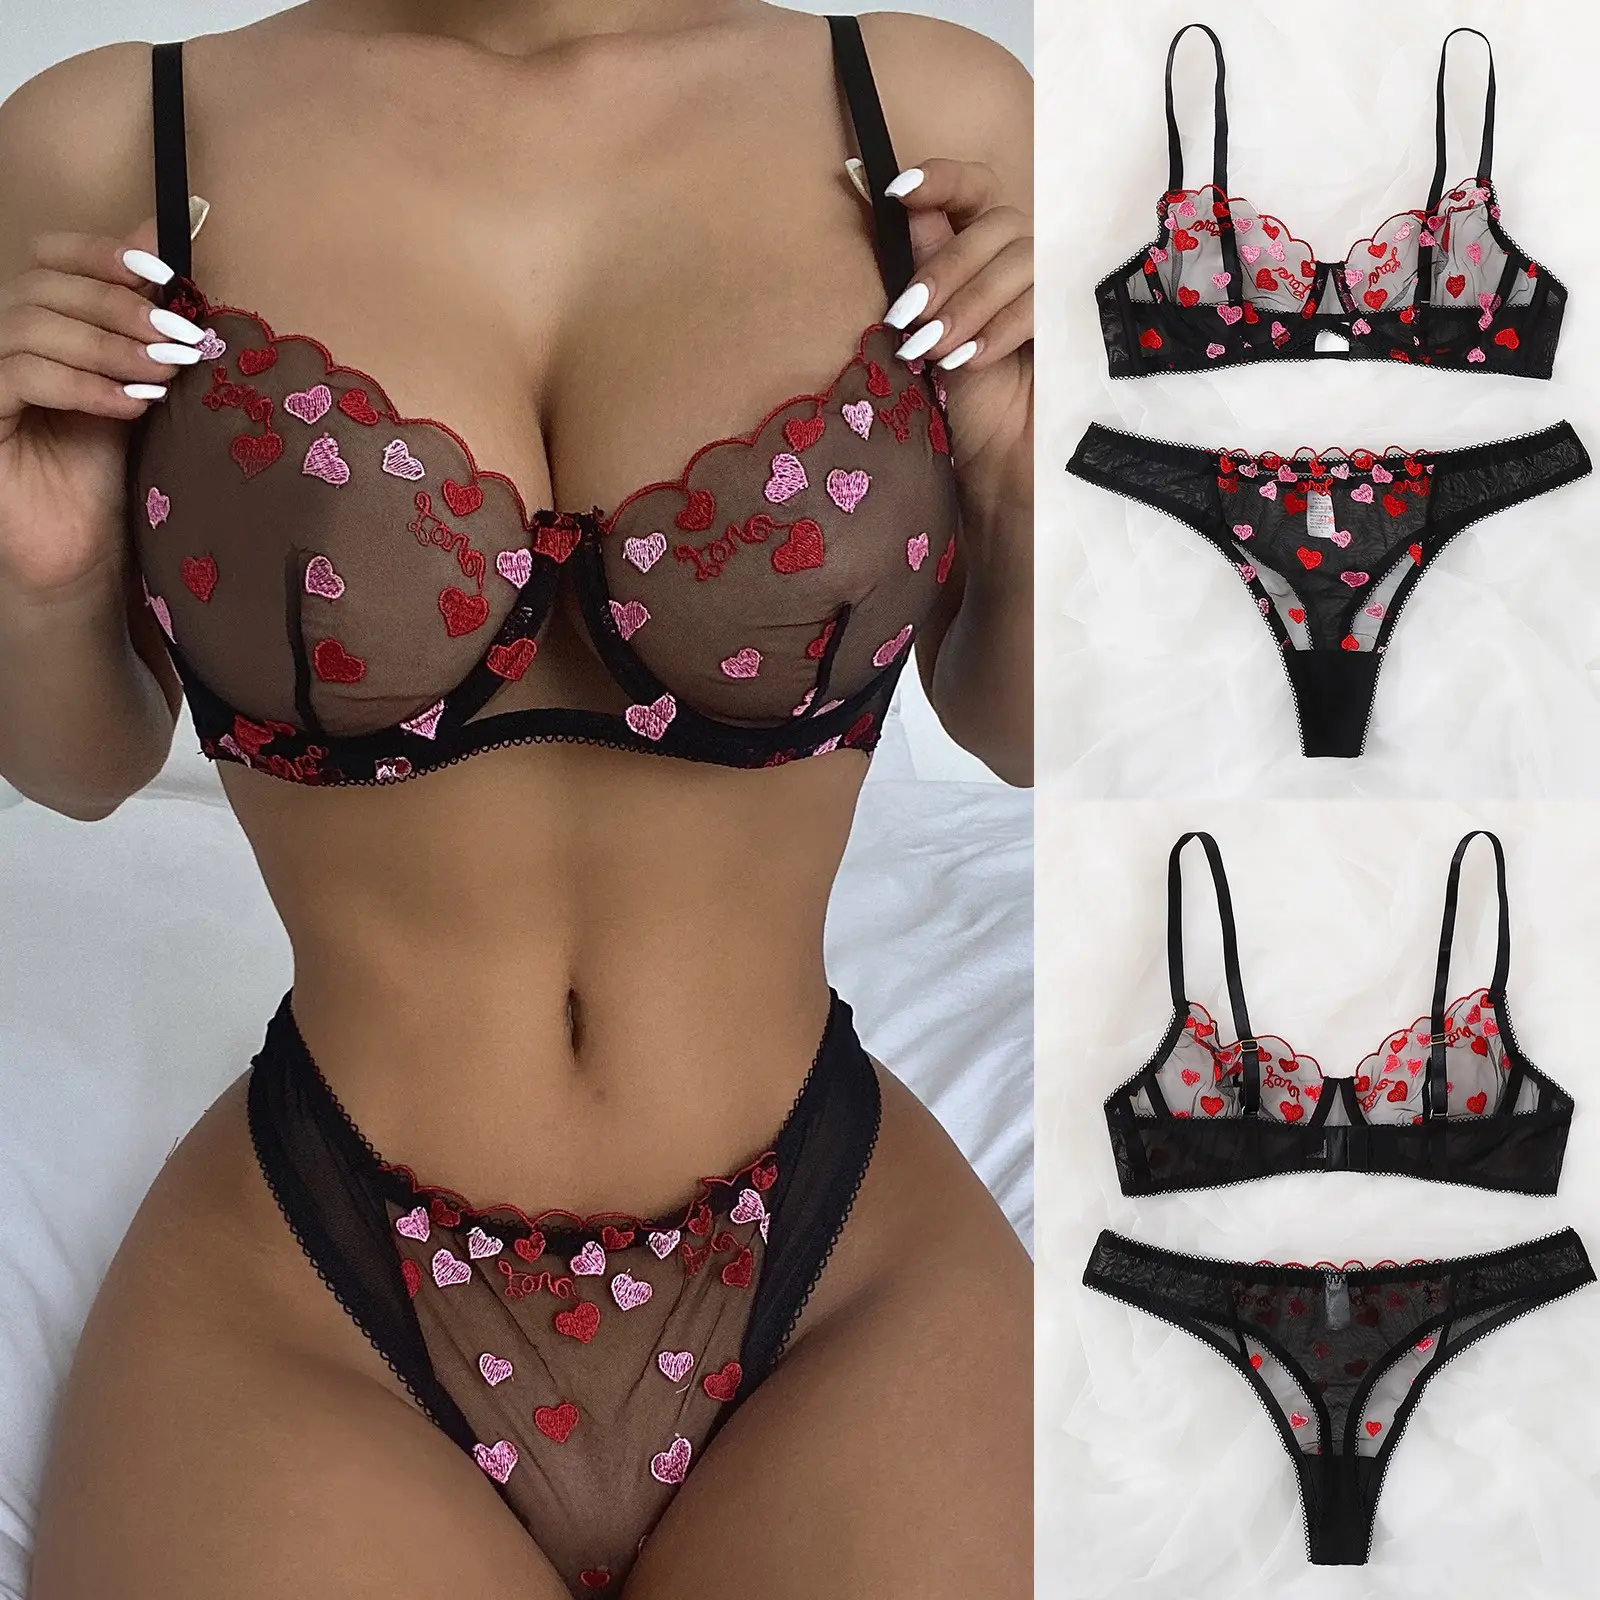 Fashionable women heart embroidery lace lingerie set girl bra panty suit sexy erotic perspective lingerie set